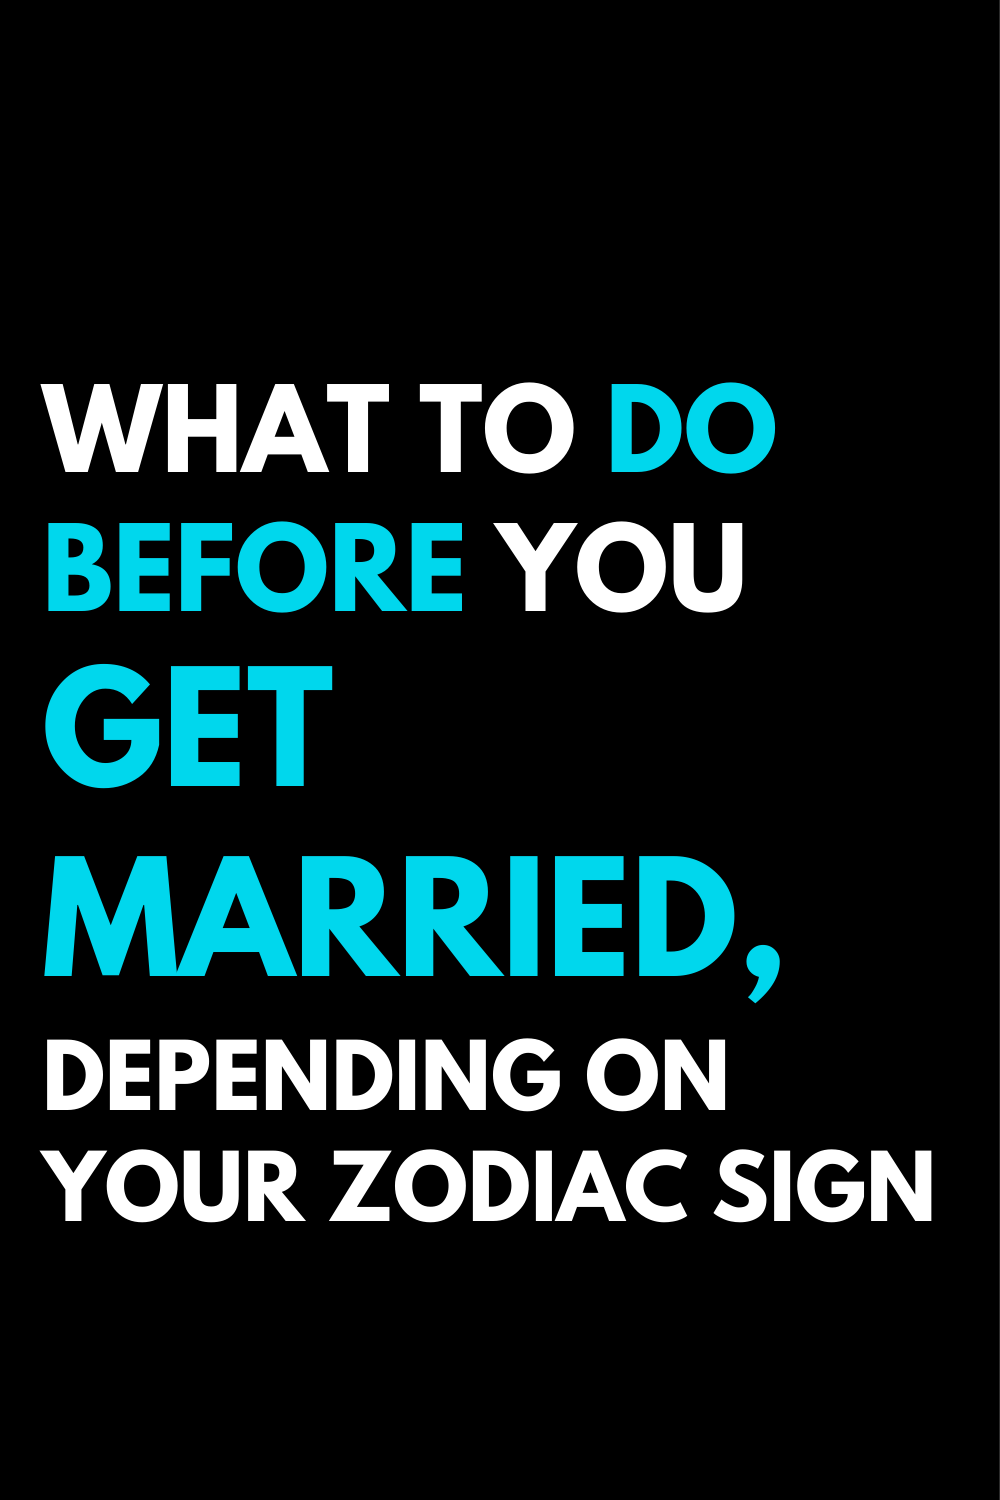 What to do before you get married, depending on your zodiac sign